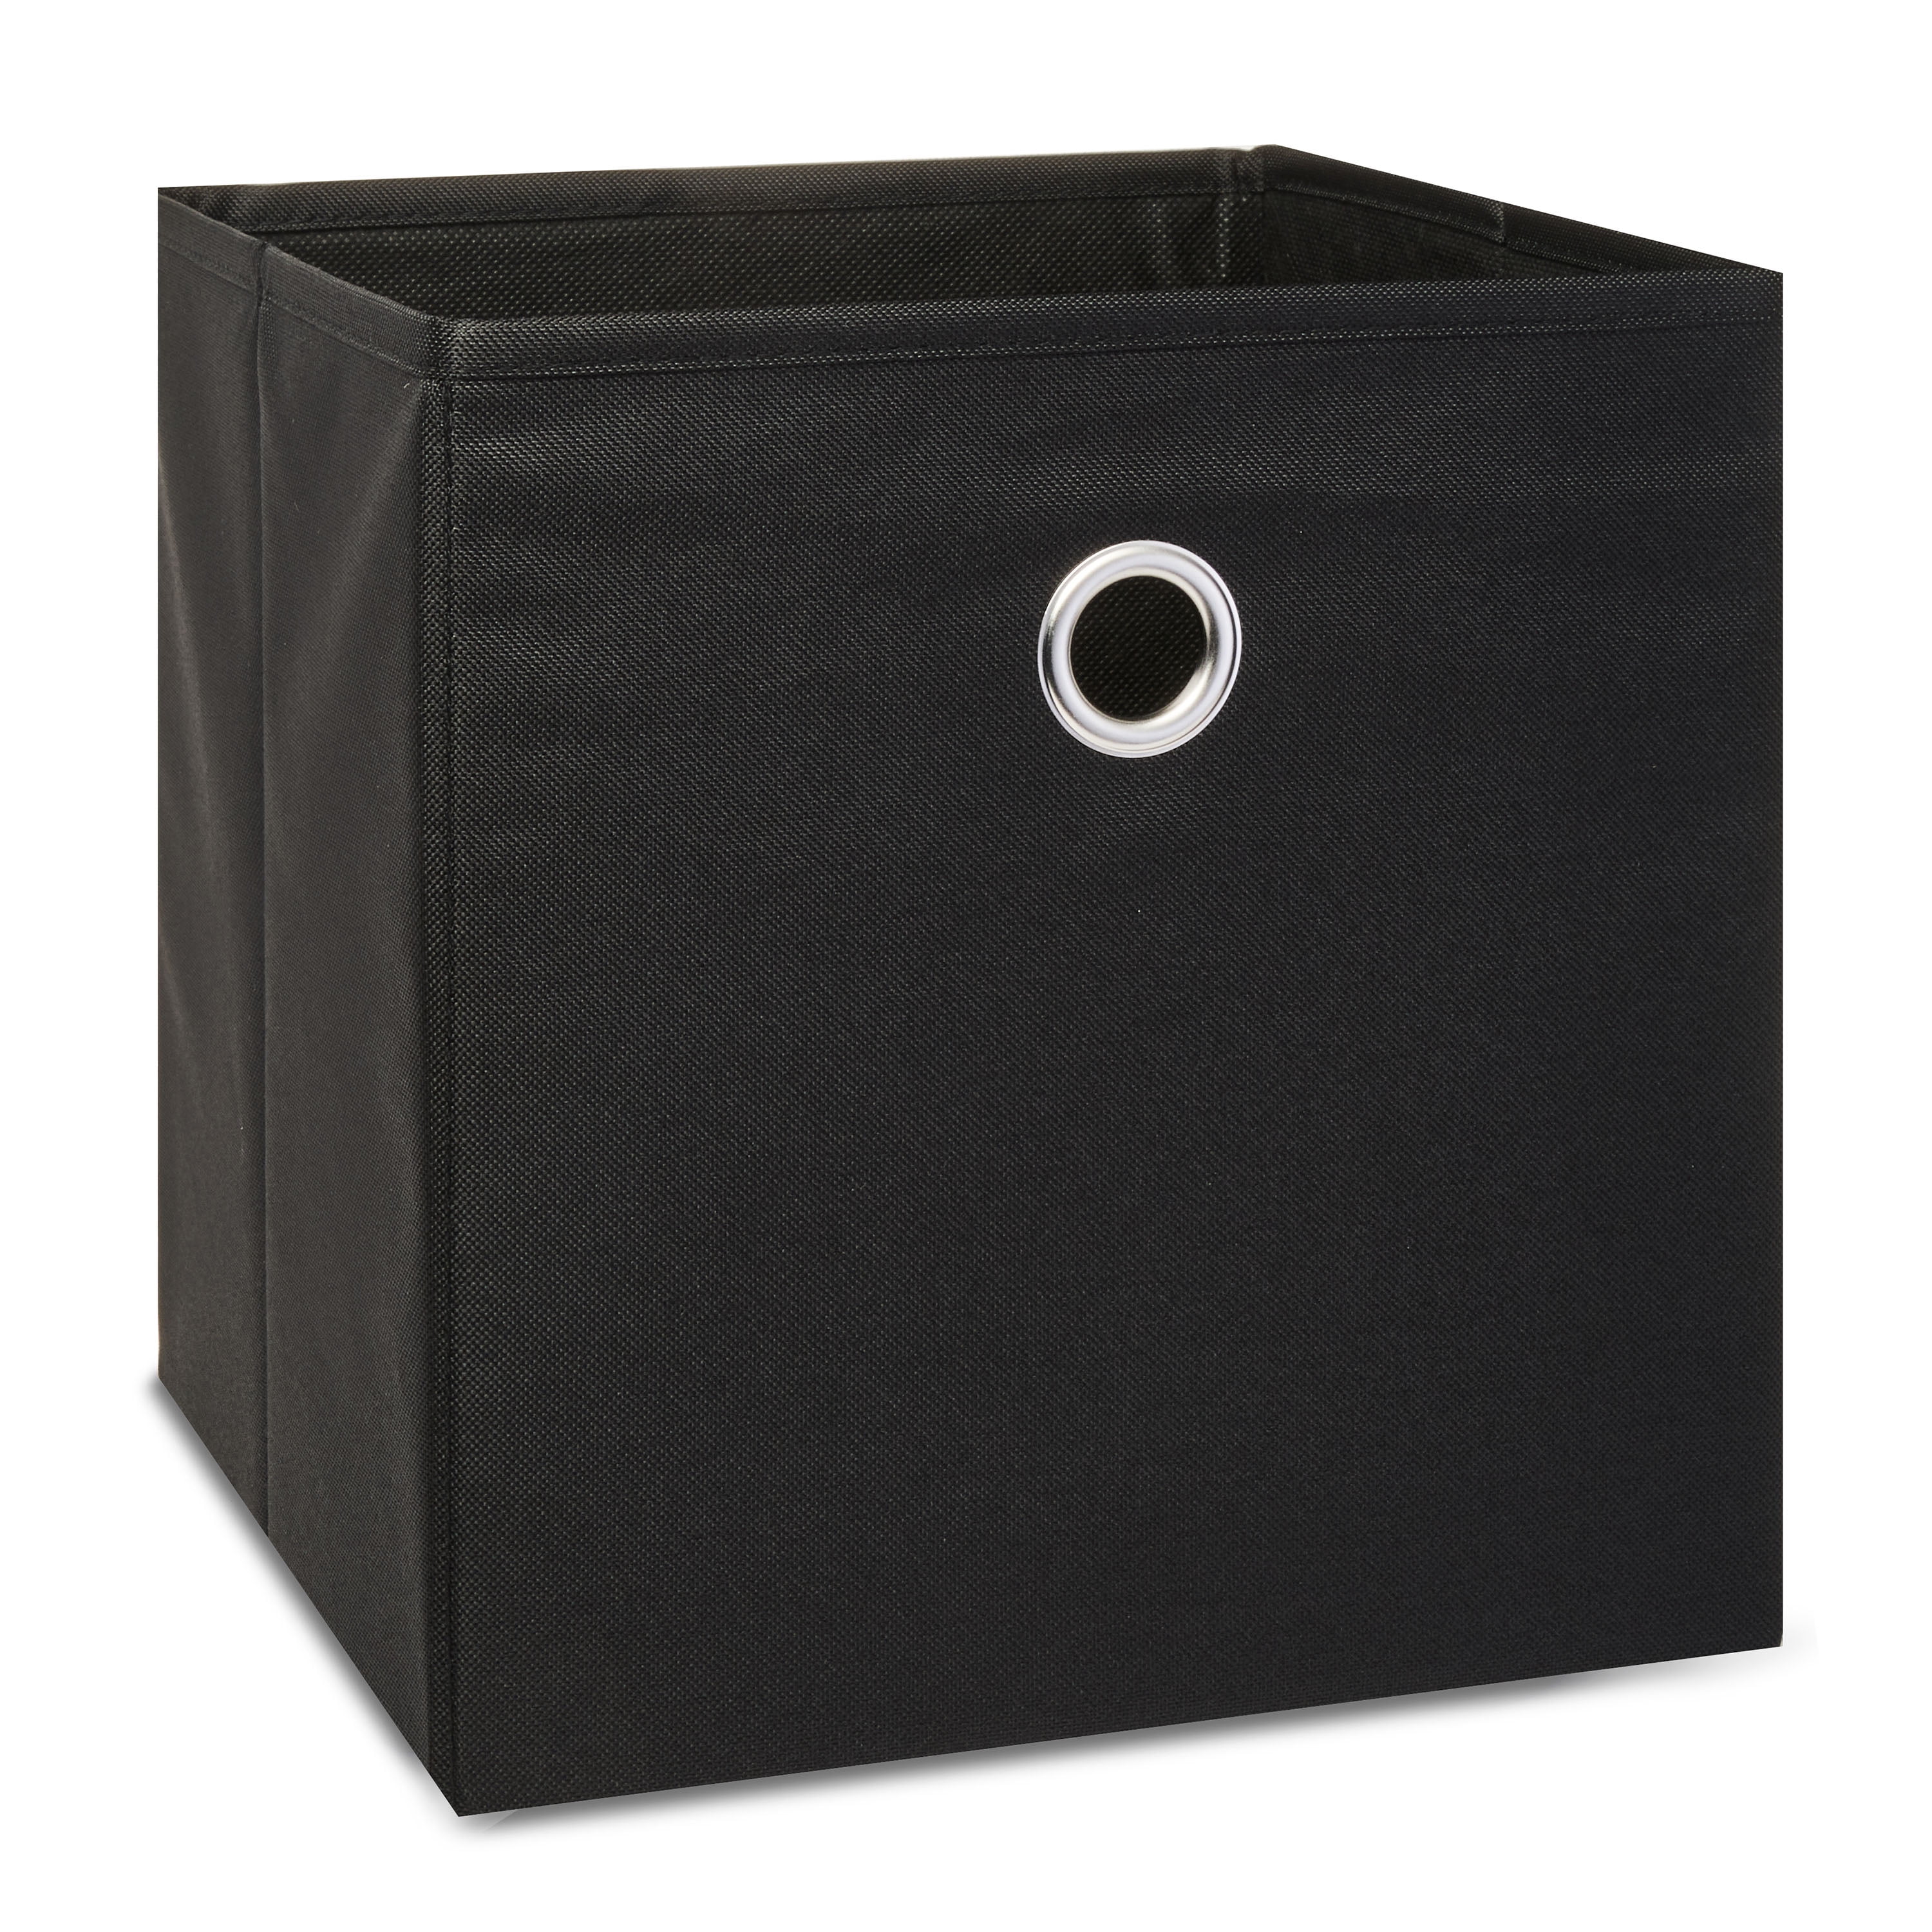 large canvas storage boxes with lids